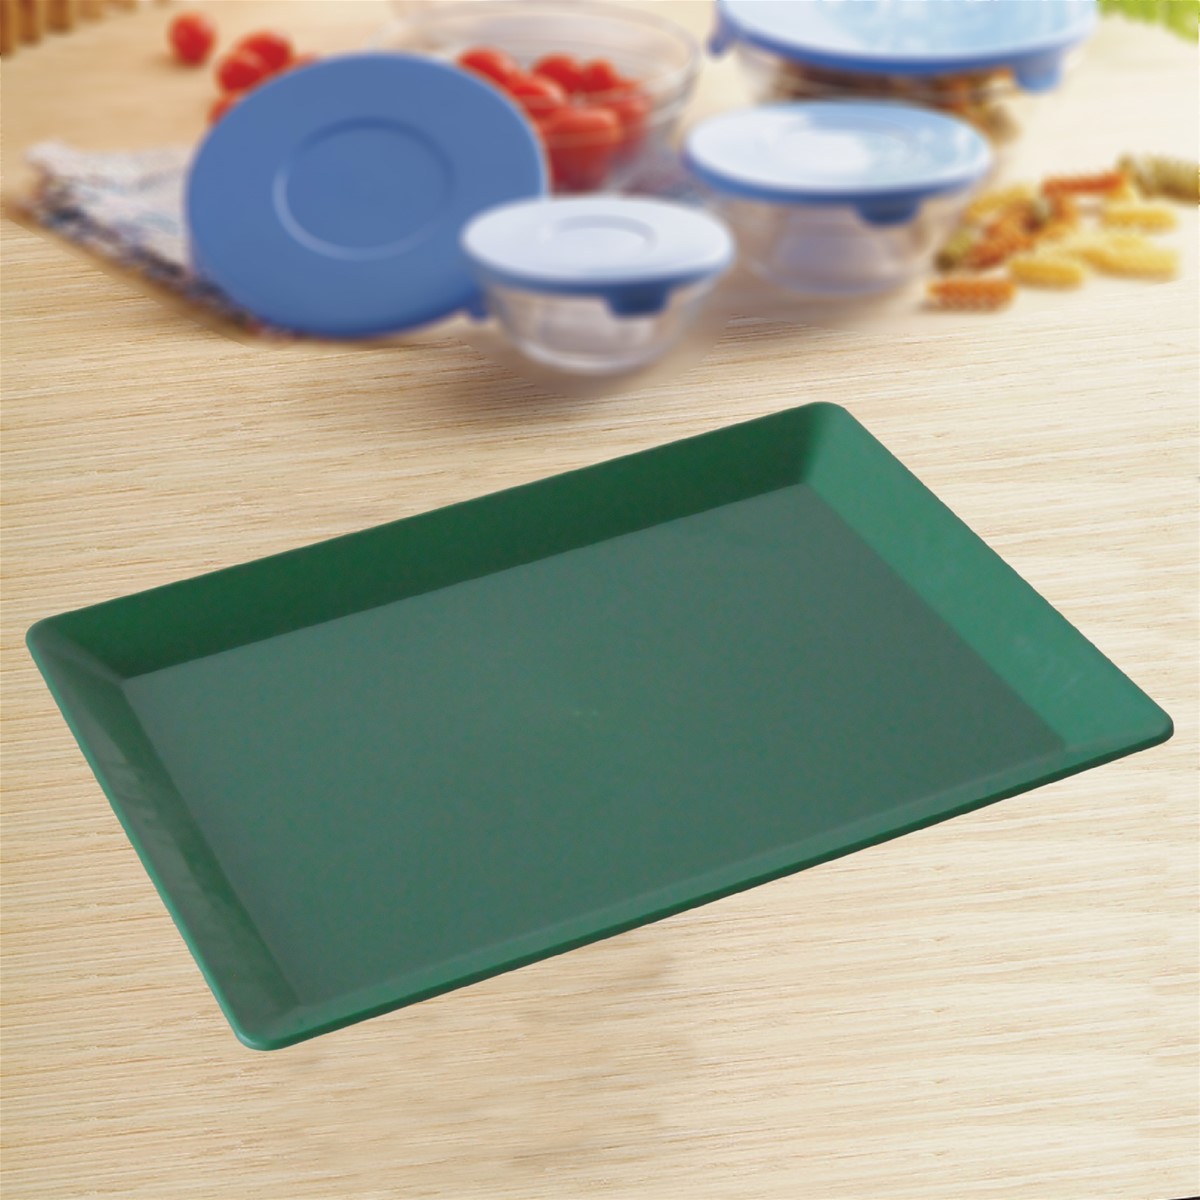 Wholesale High Grade Dishes Plates Rectangular Polypropylene Plate for Sale